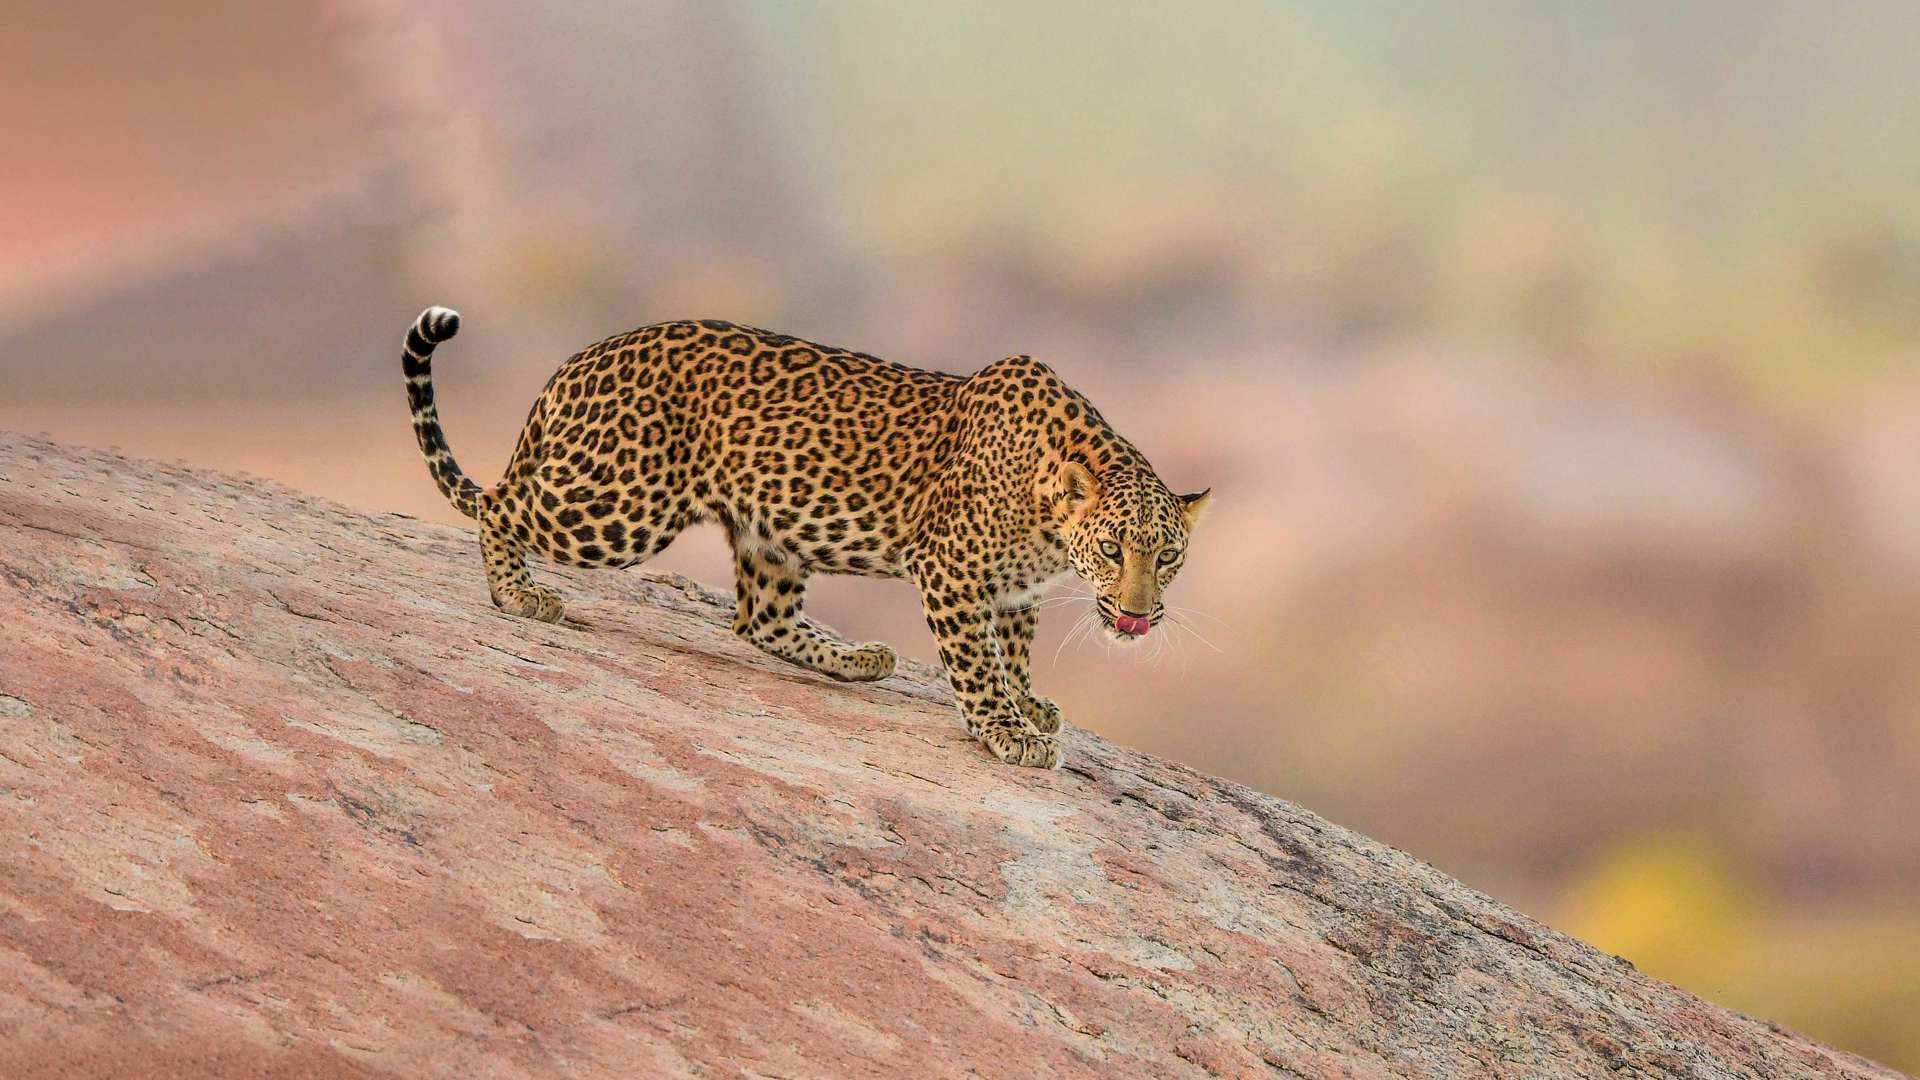 Leopard On The Hills Of Jawai, India